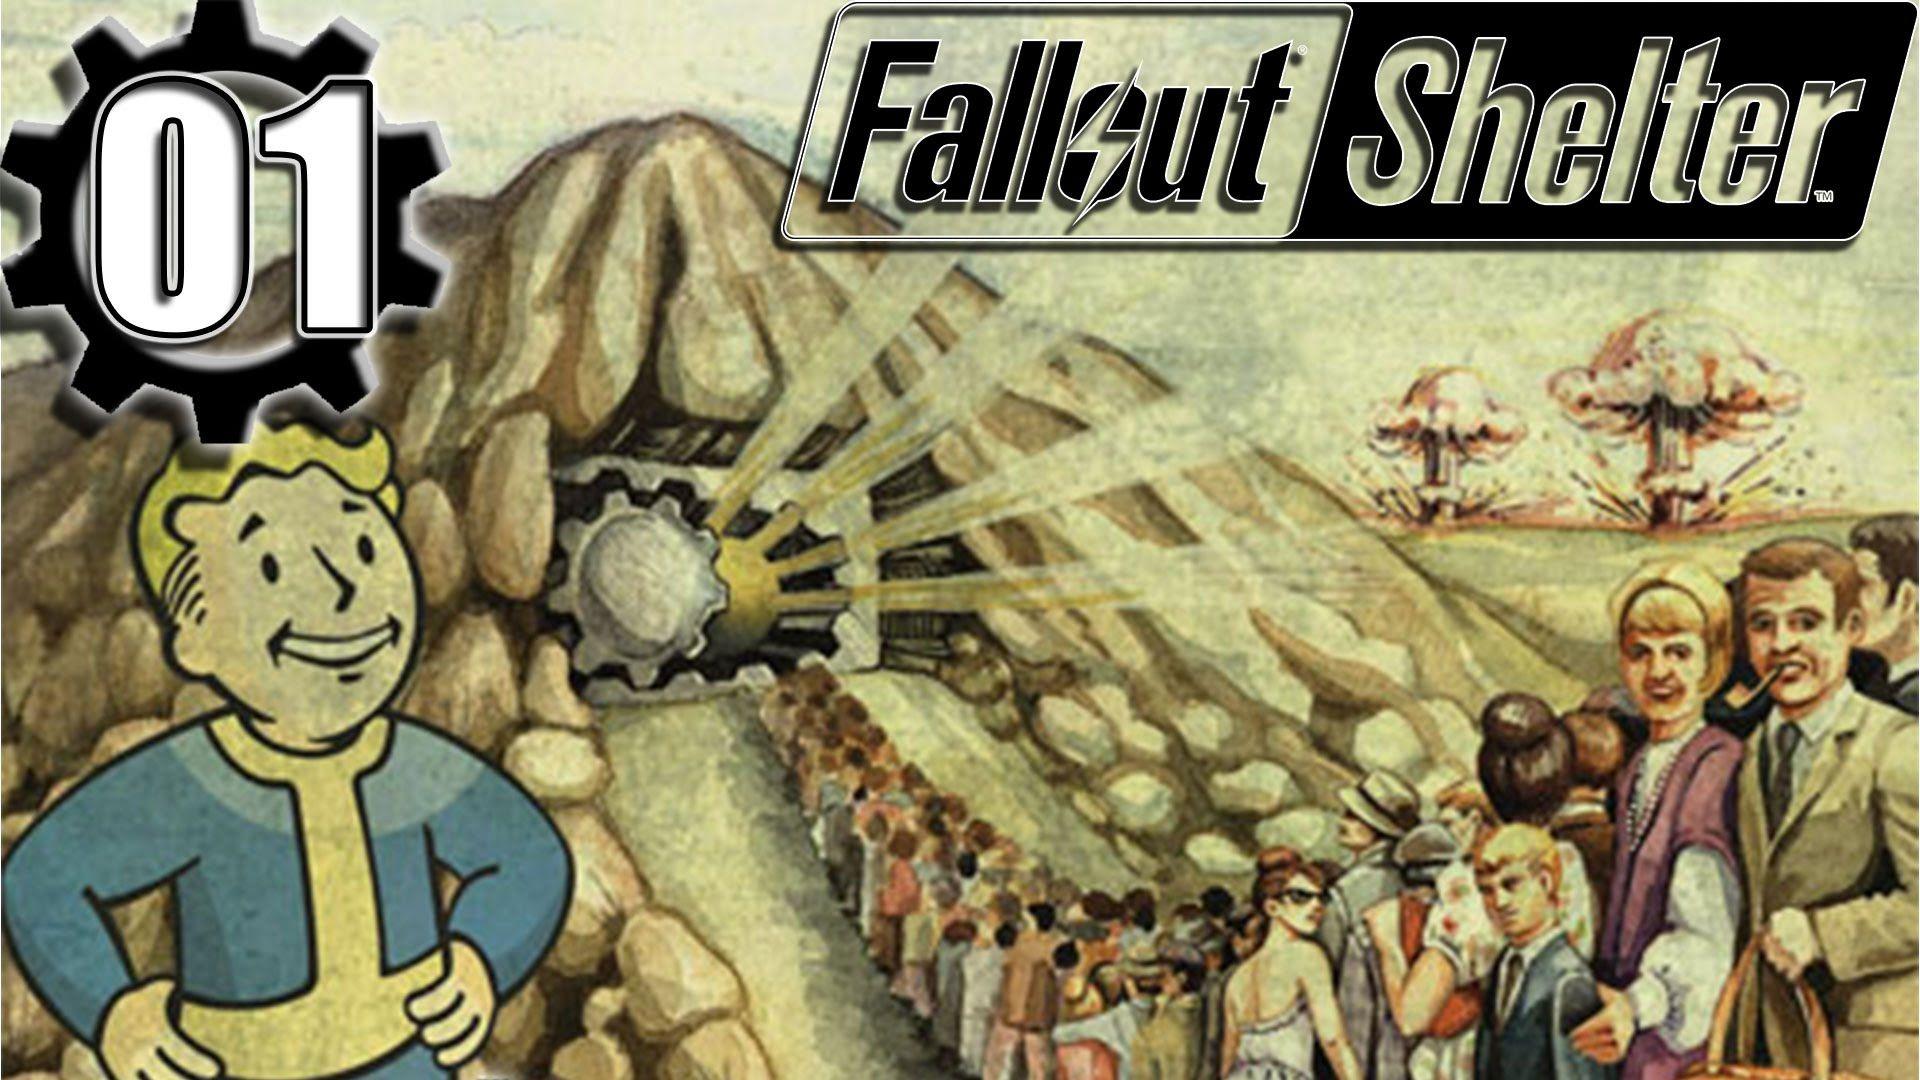 Fallout Shelter Wallpaper (Picture)